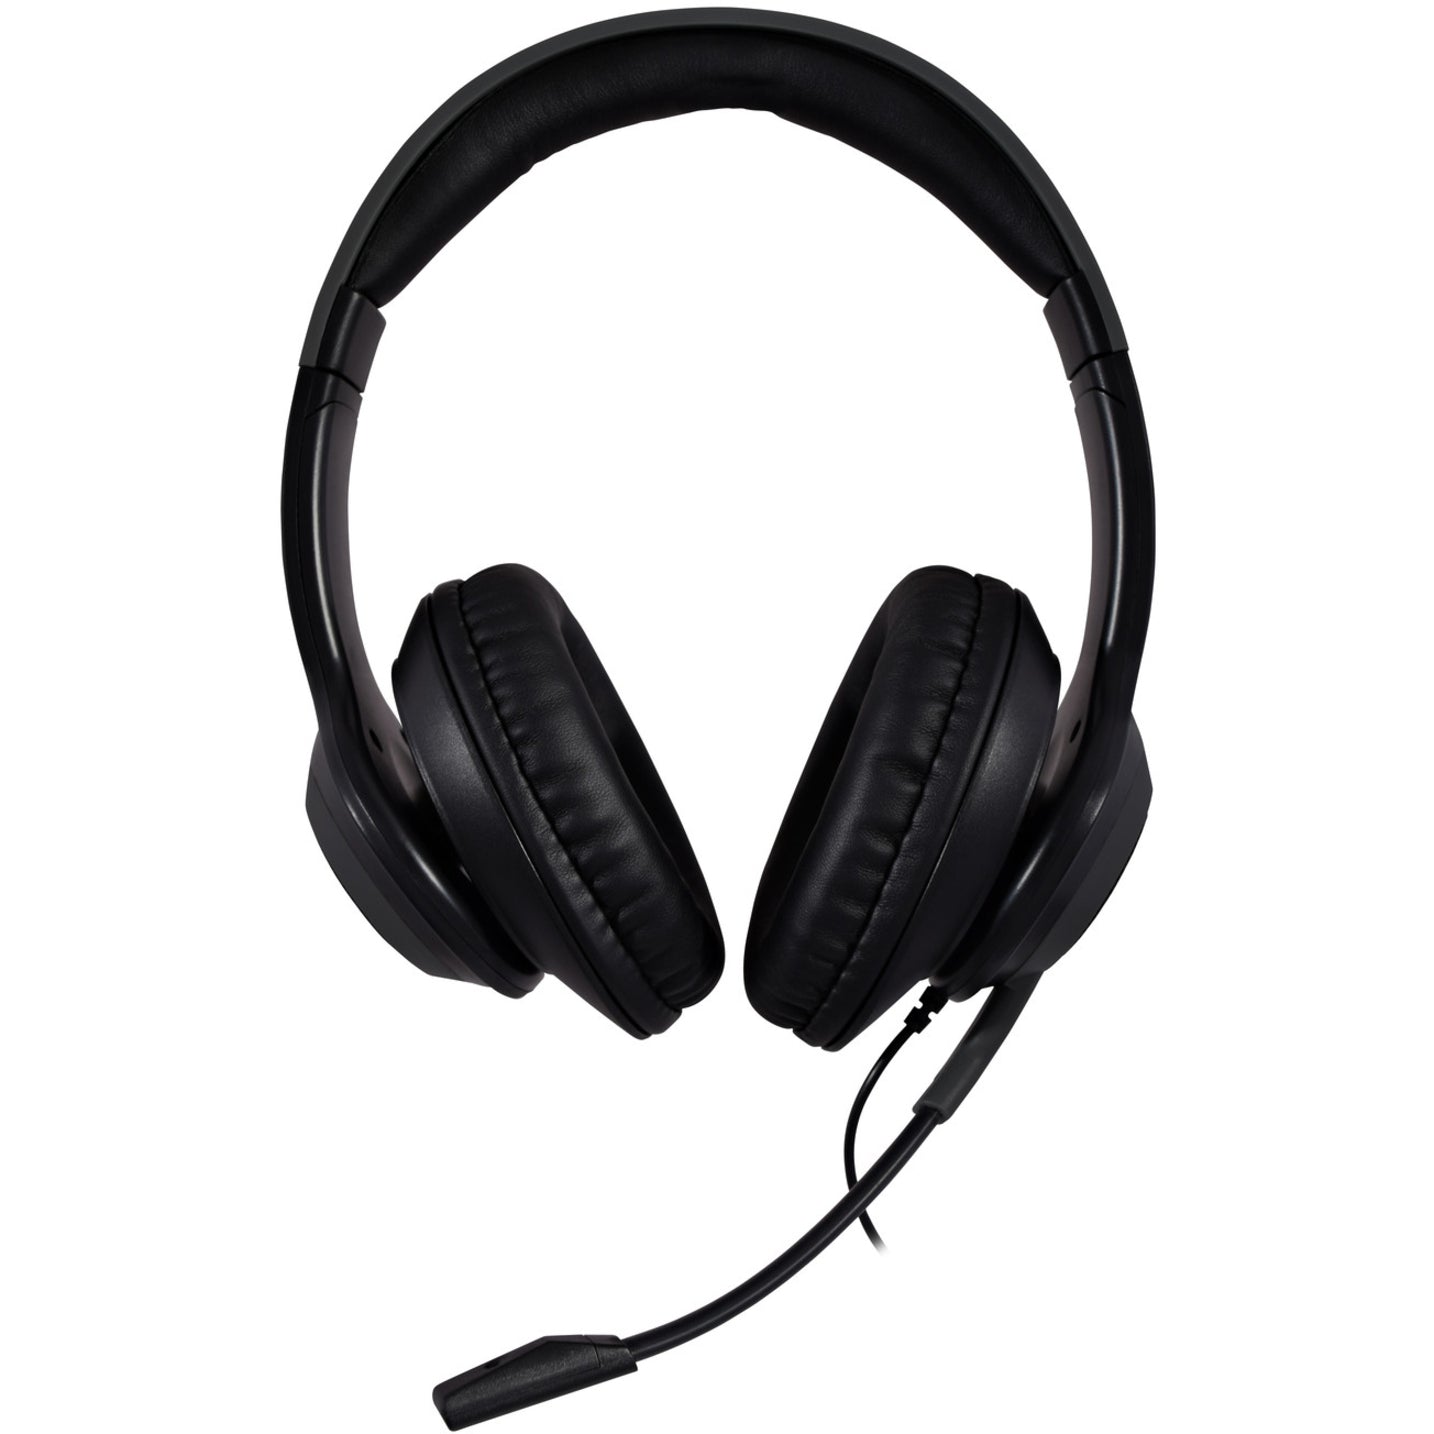 V7 HC701 Premium Over-Ear Stereo Headset with Boom Mic, Noise Cancelling, USB Control Hub